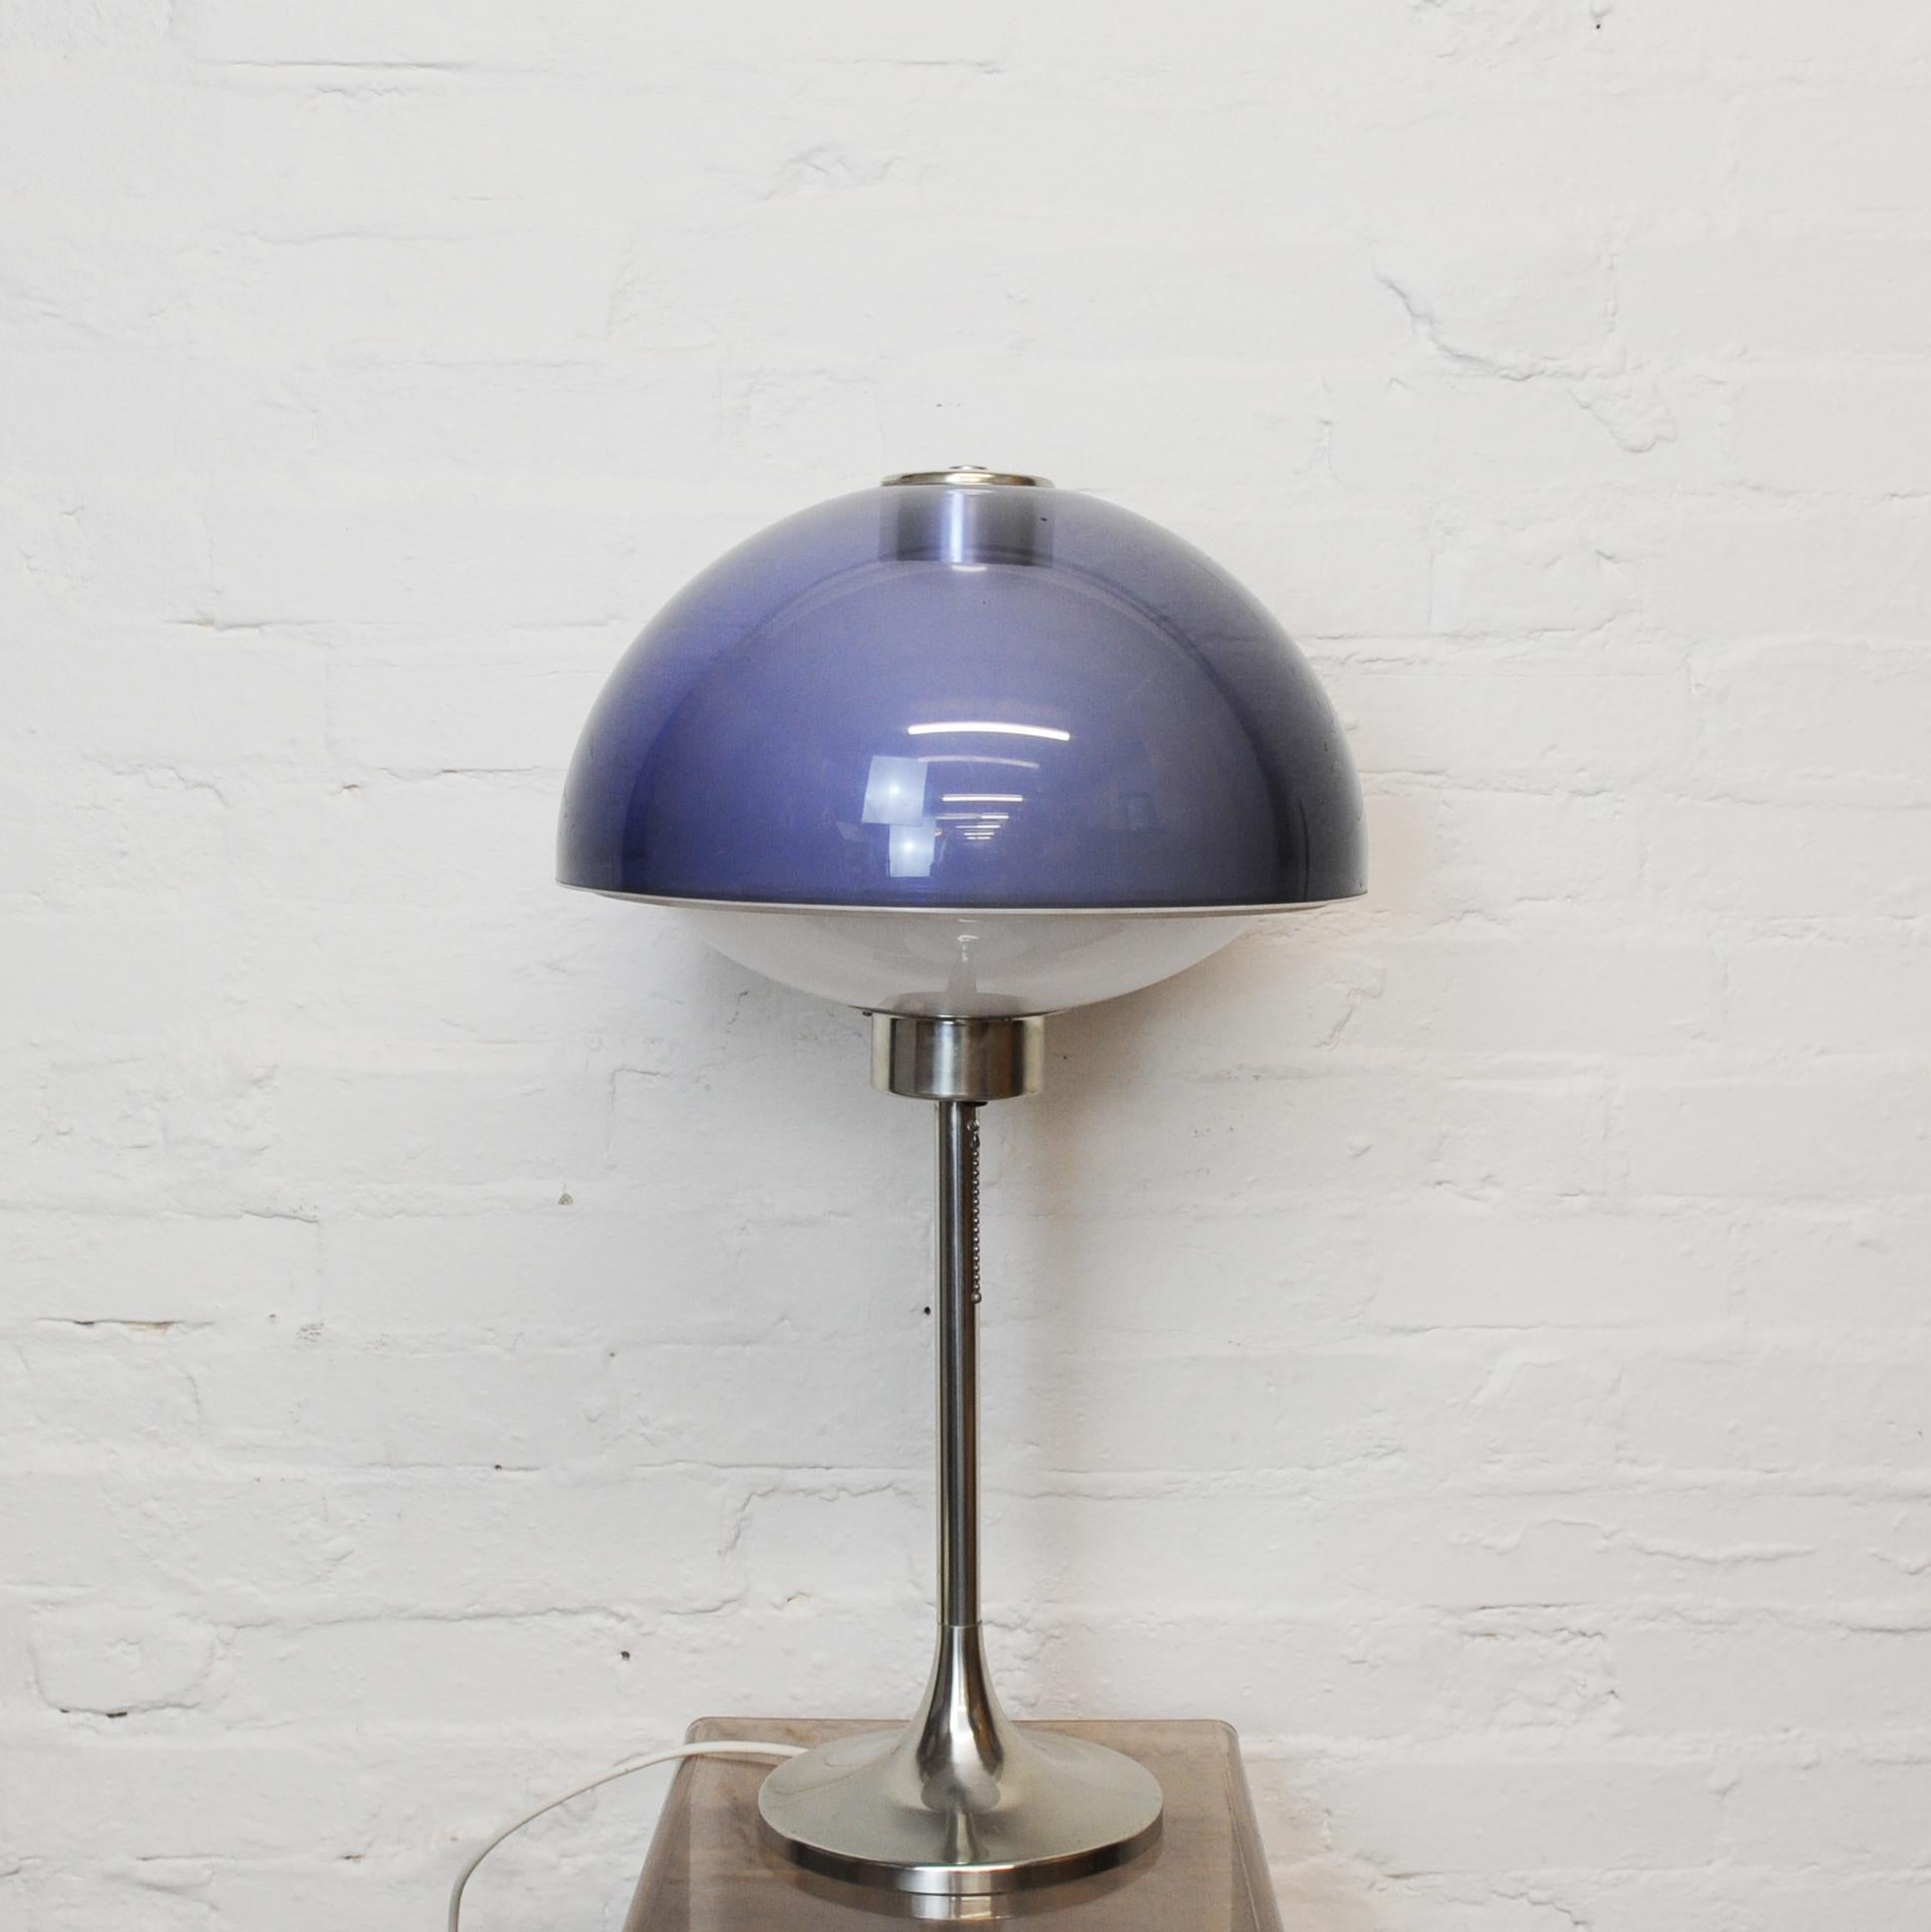 A space age table/desk lamp designed in 1966 by Robert Welch and manufactured by Lumitron in England.

Designer - Robert Welch

Manufacturer - Lumitron

Design Period - 1970 to 1979

Country of Manufacture - U.K

Attribution Marks - n/a

Detailed